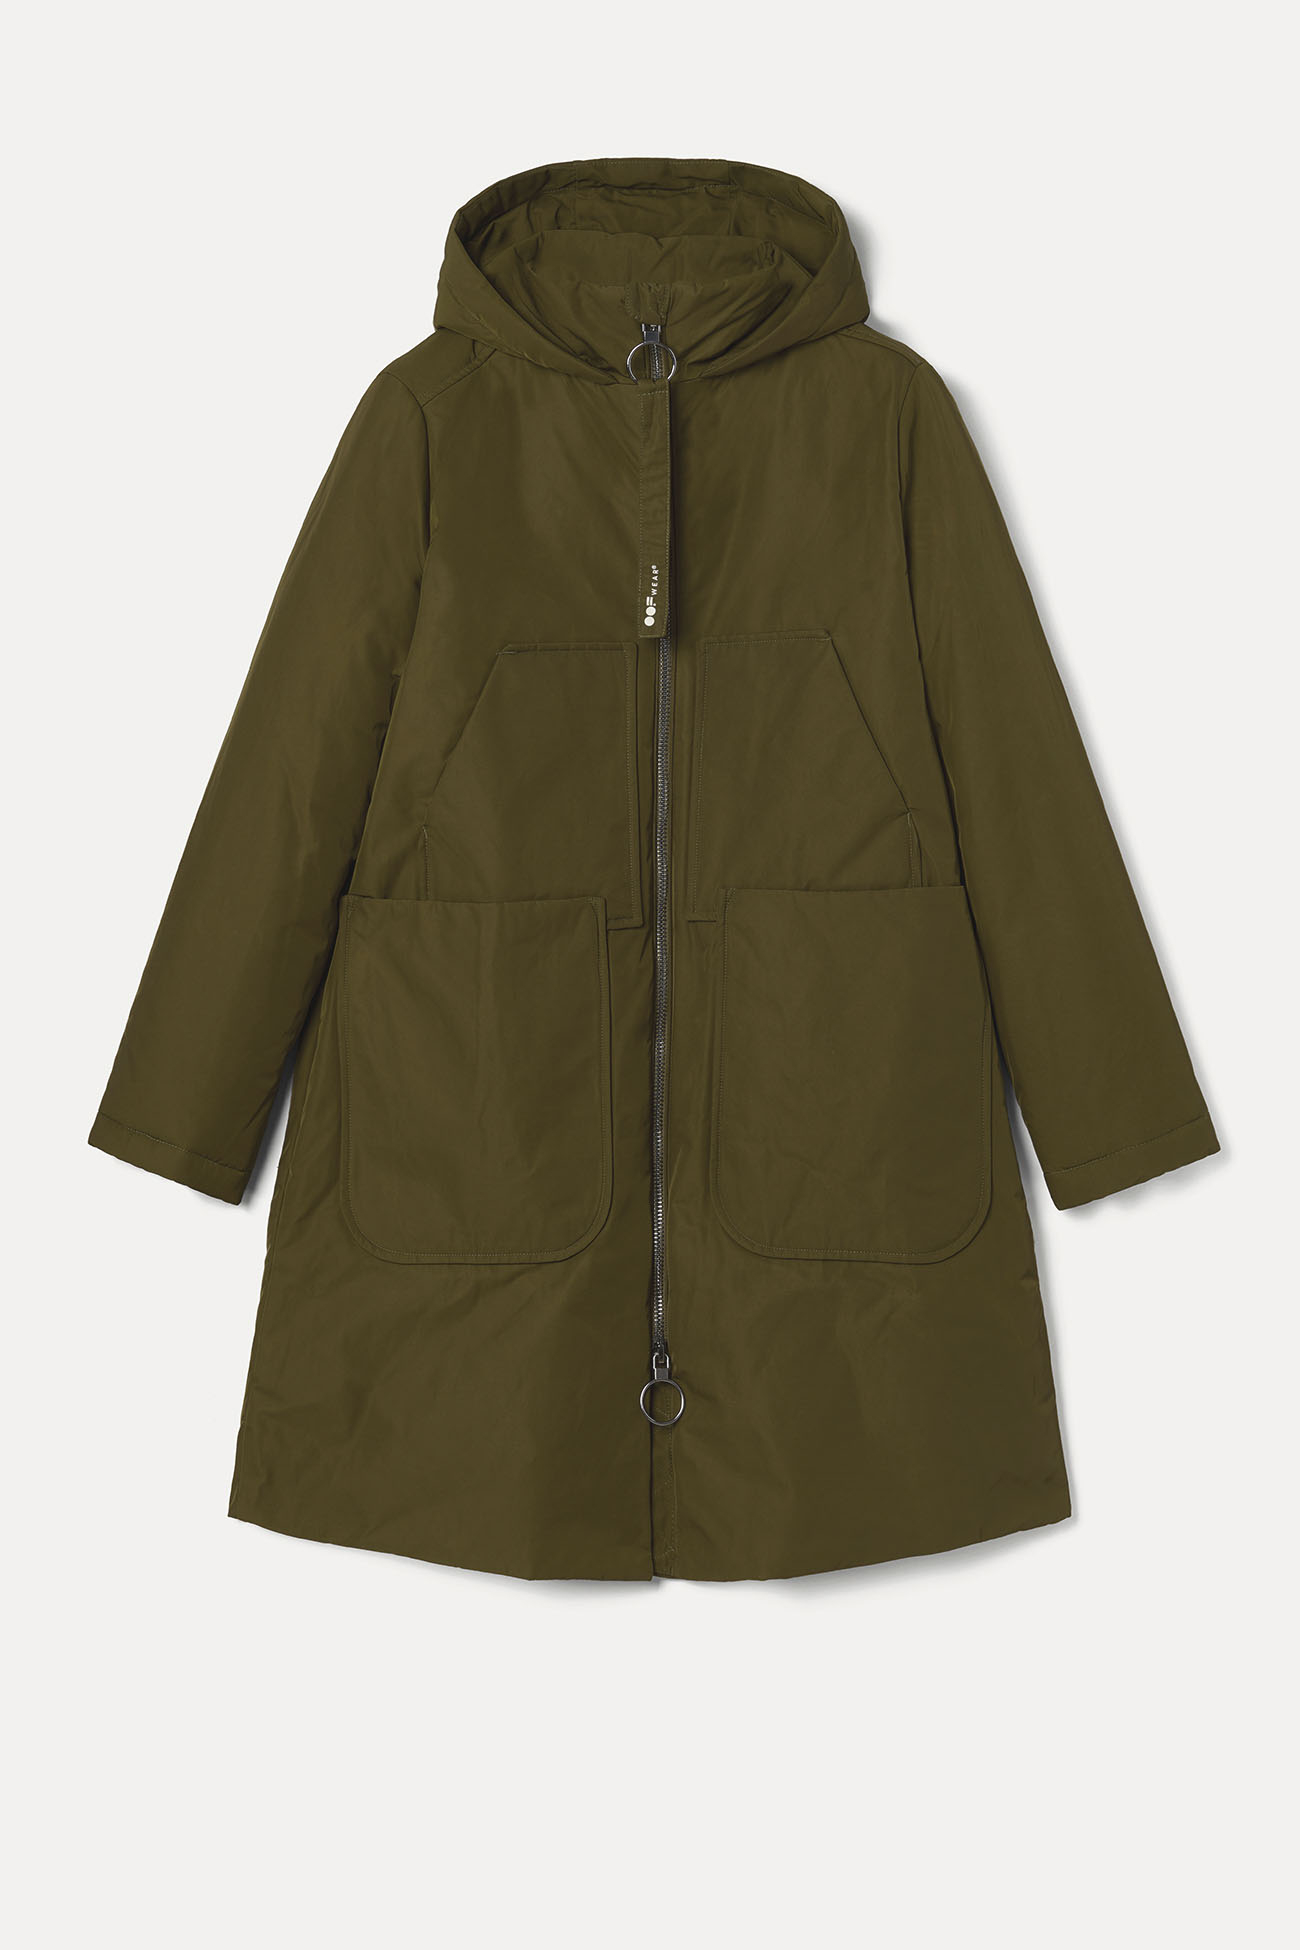 JACKET 9094 MADE IN NYLON MEMORY - ARMY GREEN - OOF WEAR